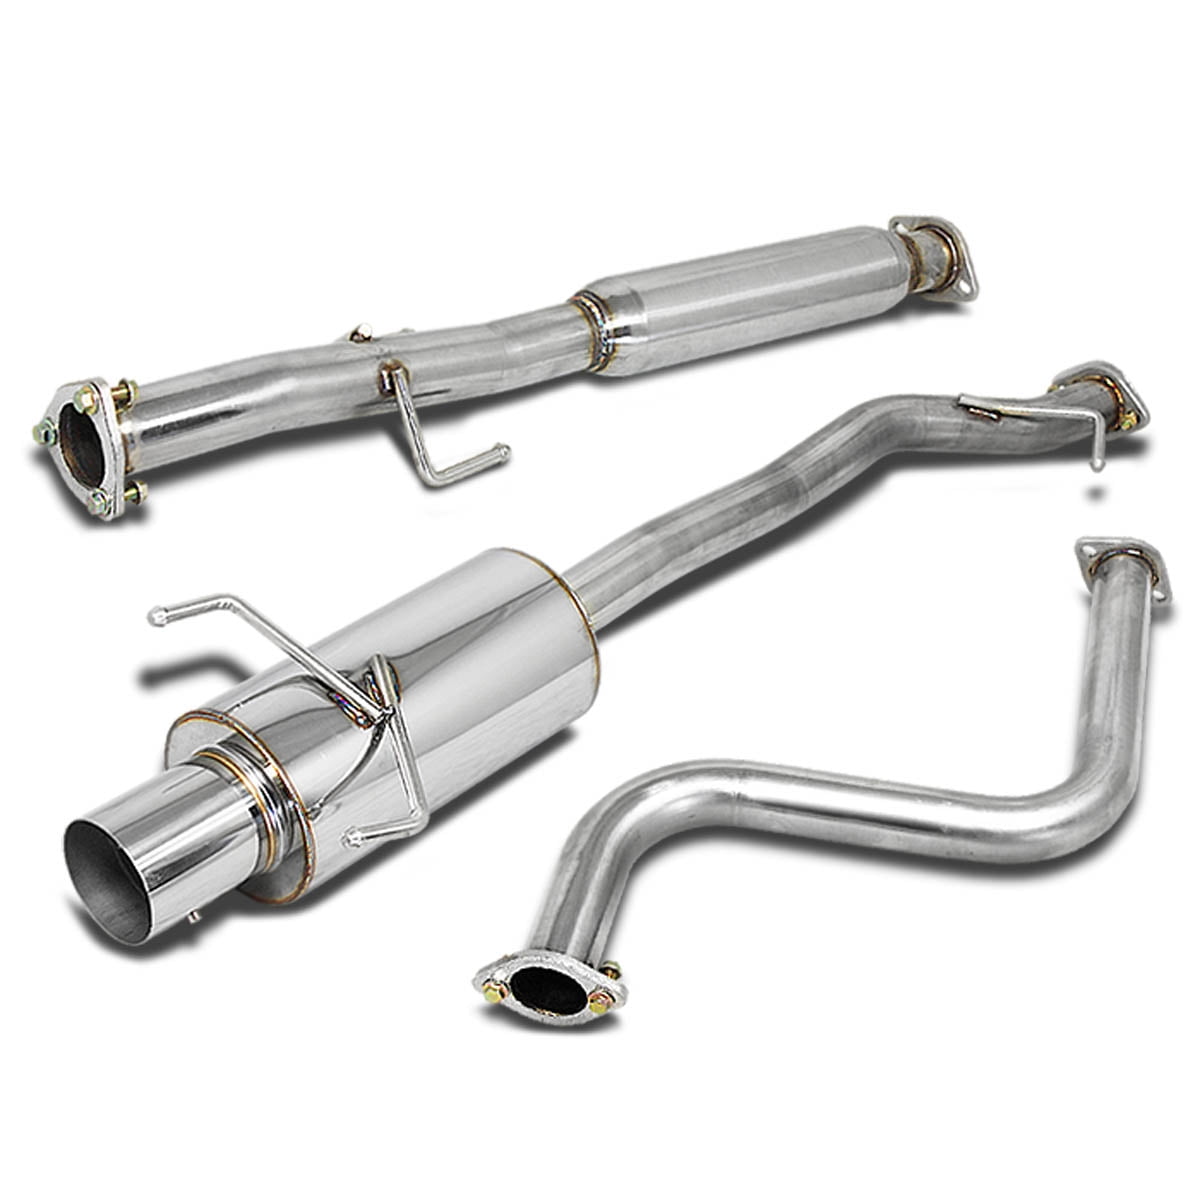 FOR 03-07 HONDA ACCORD L4 STAINLESS SS CATBACK EXHAUST SYSTEM 4.0/" MUFFLER TIP